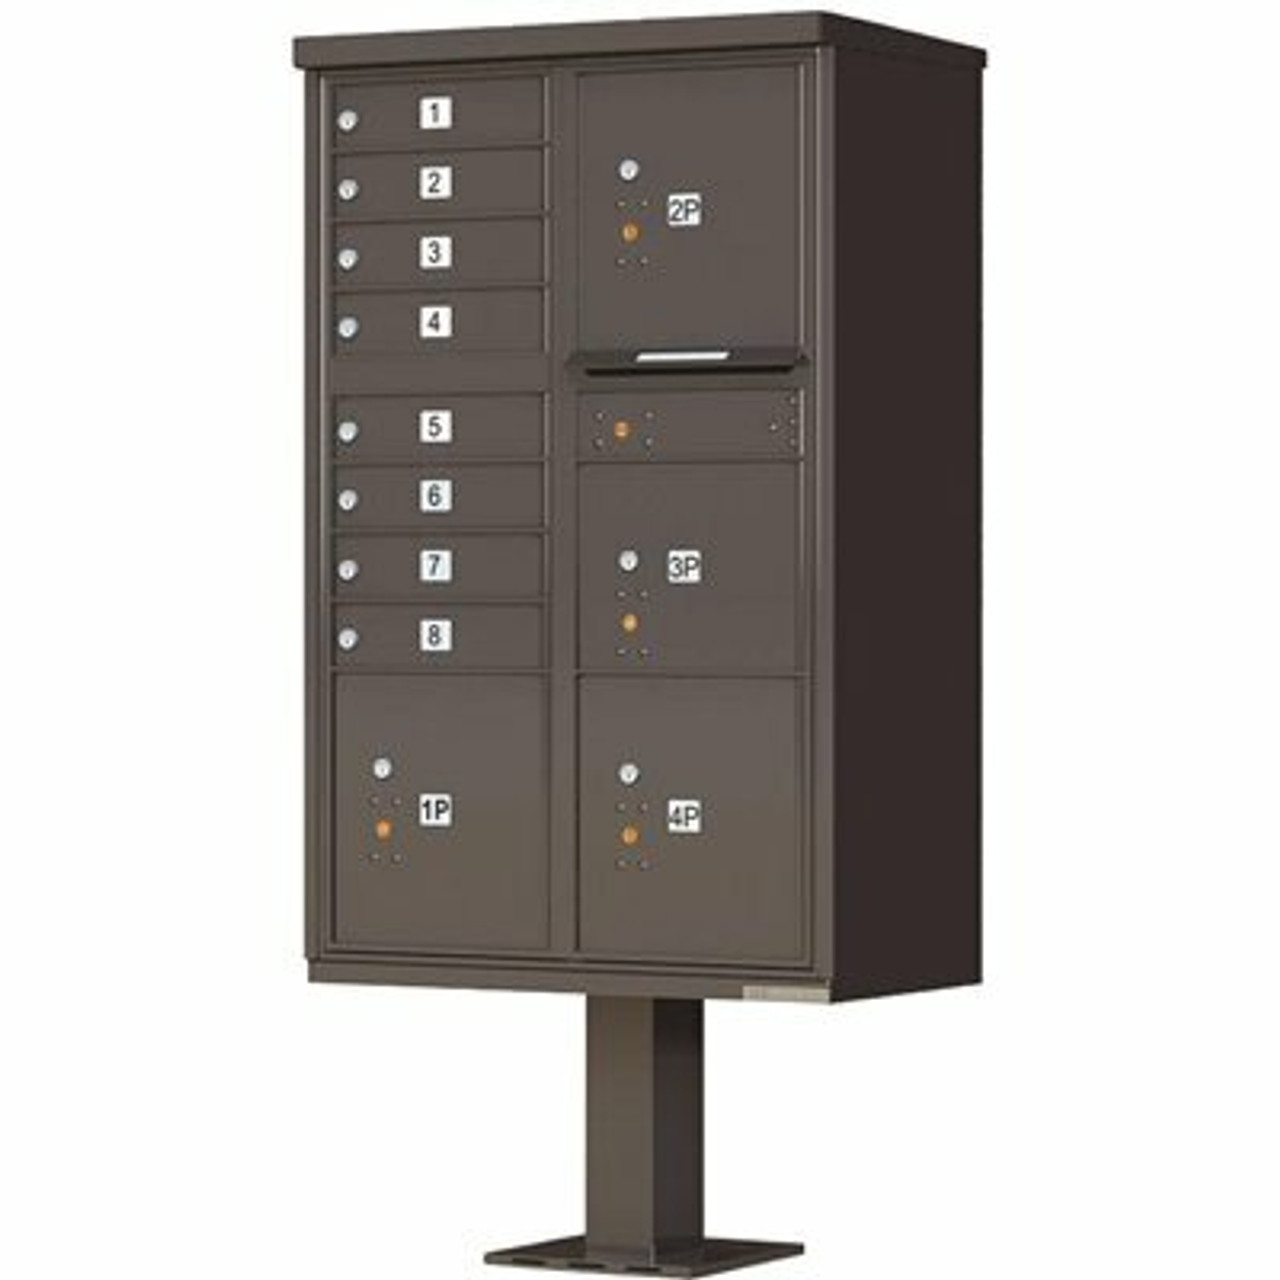 Florence 1570 Series 8-Mailboxes, 1-Outgoing Compartment, 4-Parcel Lockers, Vital Cluster Box Unit - 2474397